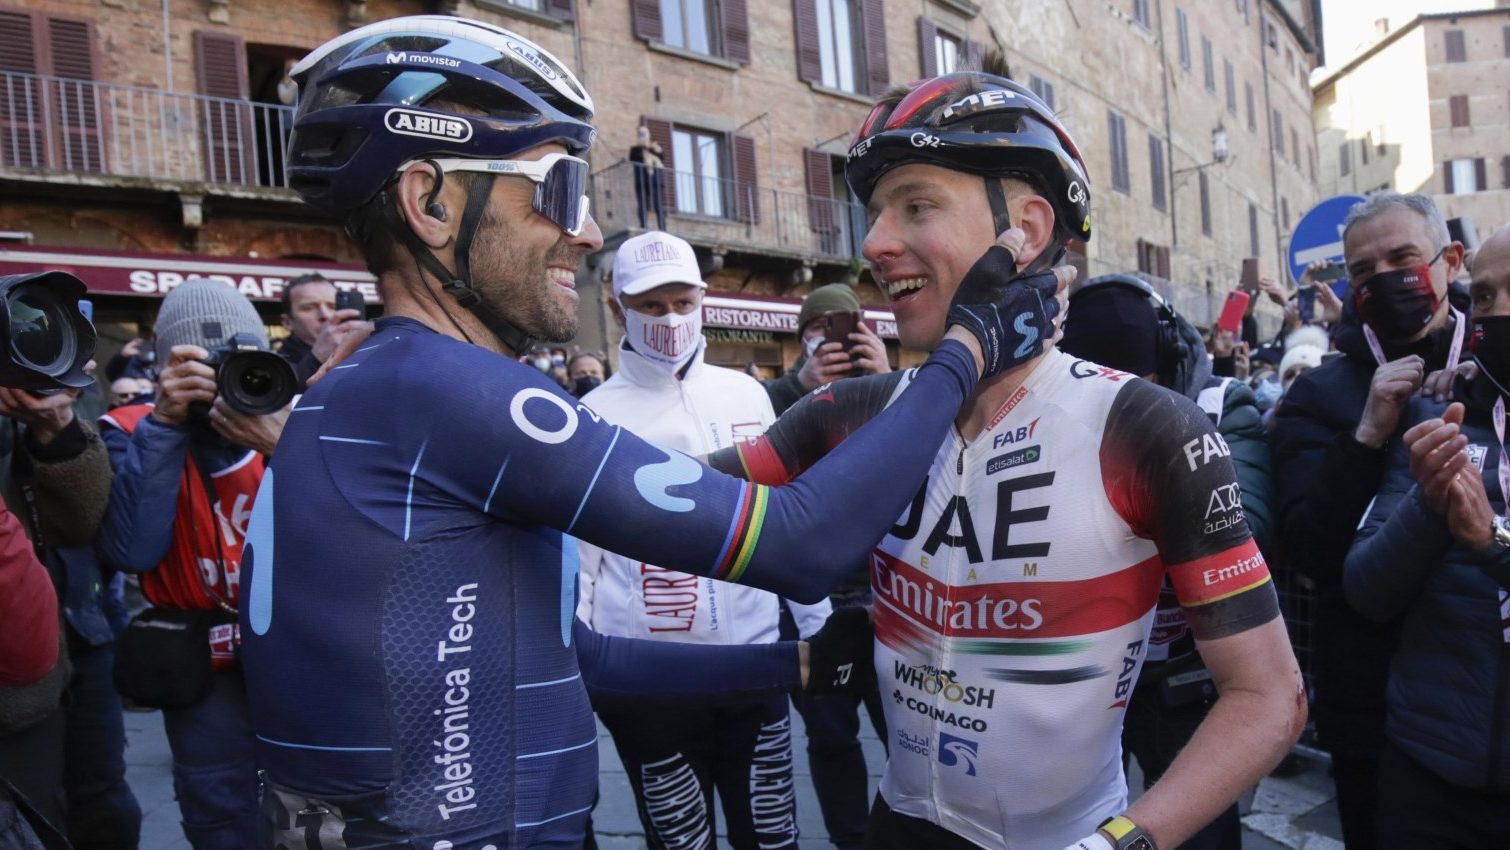 Siena - Italy - cycling - Alejandro Valverde (ESP - Movistar Team) - Tadej Pogacar (SLO - UAE Team Emirates) pictured during 8th Strade Bianche Donne (1.WWT) a one day race between Siena and Siena (184KM) - Photo: Luca Bettini/SCA/Cor Vos © 2022